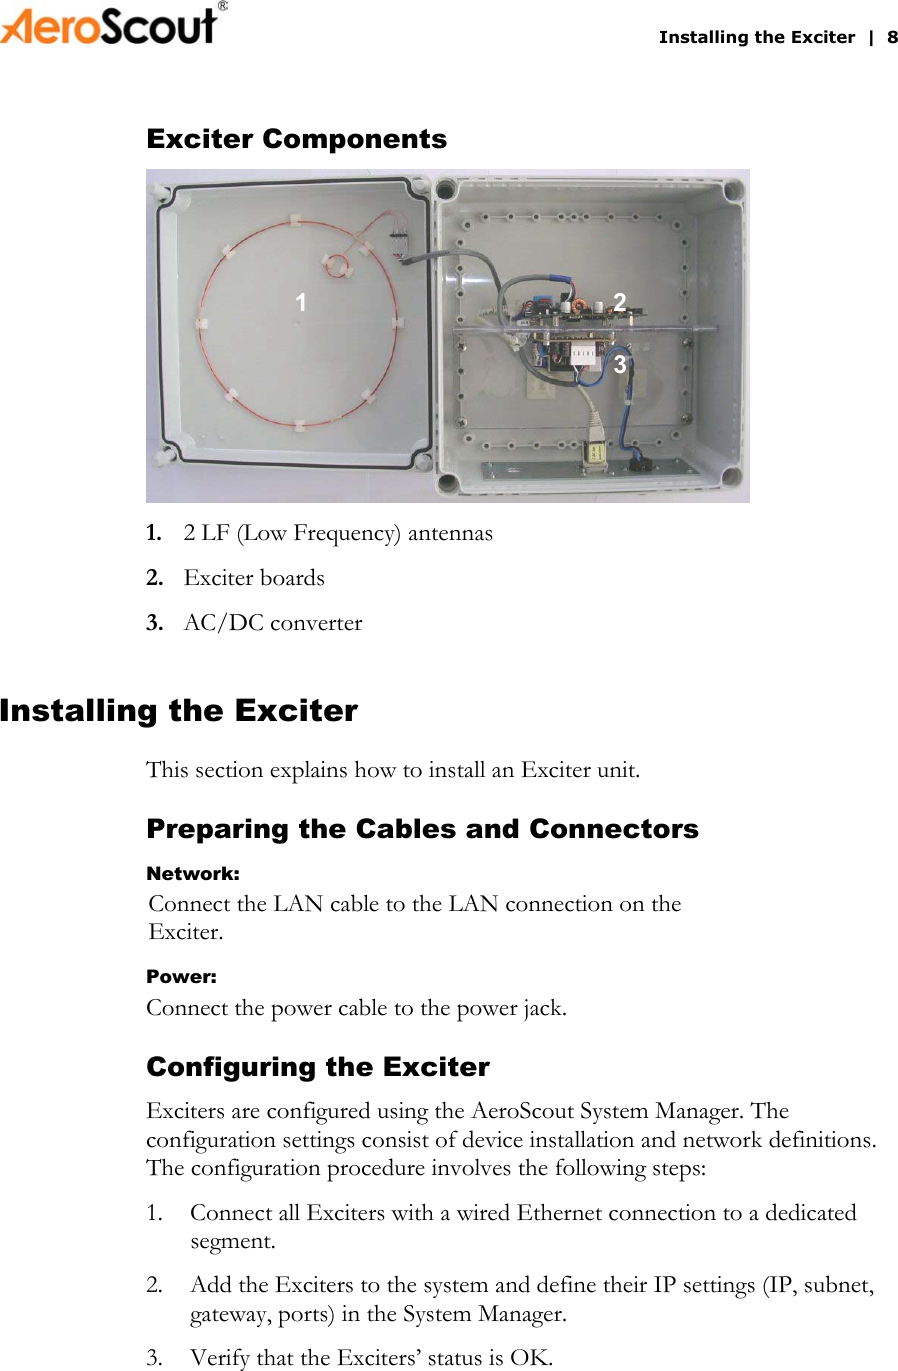       Installing the Exciter  |  8 Exciter Components  1 231.  2 LF (Low Frequency) antennas 2.  Exciter boards 3.  AC/DC converter Installing the Exciter This section explains how to install an Exciter unit. Preparing the Cables and Connectors Network: Connect the LAN cable to the LAN connection on the Exciter. Power: Connect the power cable to the power jack. Configuring the Exciter Exciters are configured using the AeroScout System Manager. The configuration settings consist of device installation and network definitions. The configuration procedure involves the following steps: 1.  Connect all Exciters with a wired Ethernet connection to a dedicated segment. 2.  Add the Exciters to the system and define their IP settings (IP, subnet, gateway, ports) in the System Manager. 3.  Verify that the Exciters’ status is OK. 